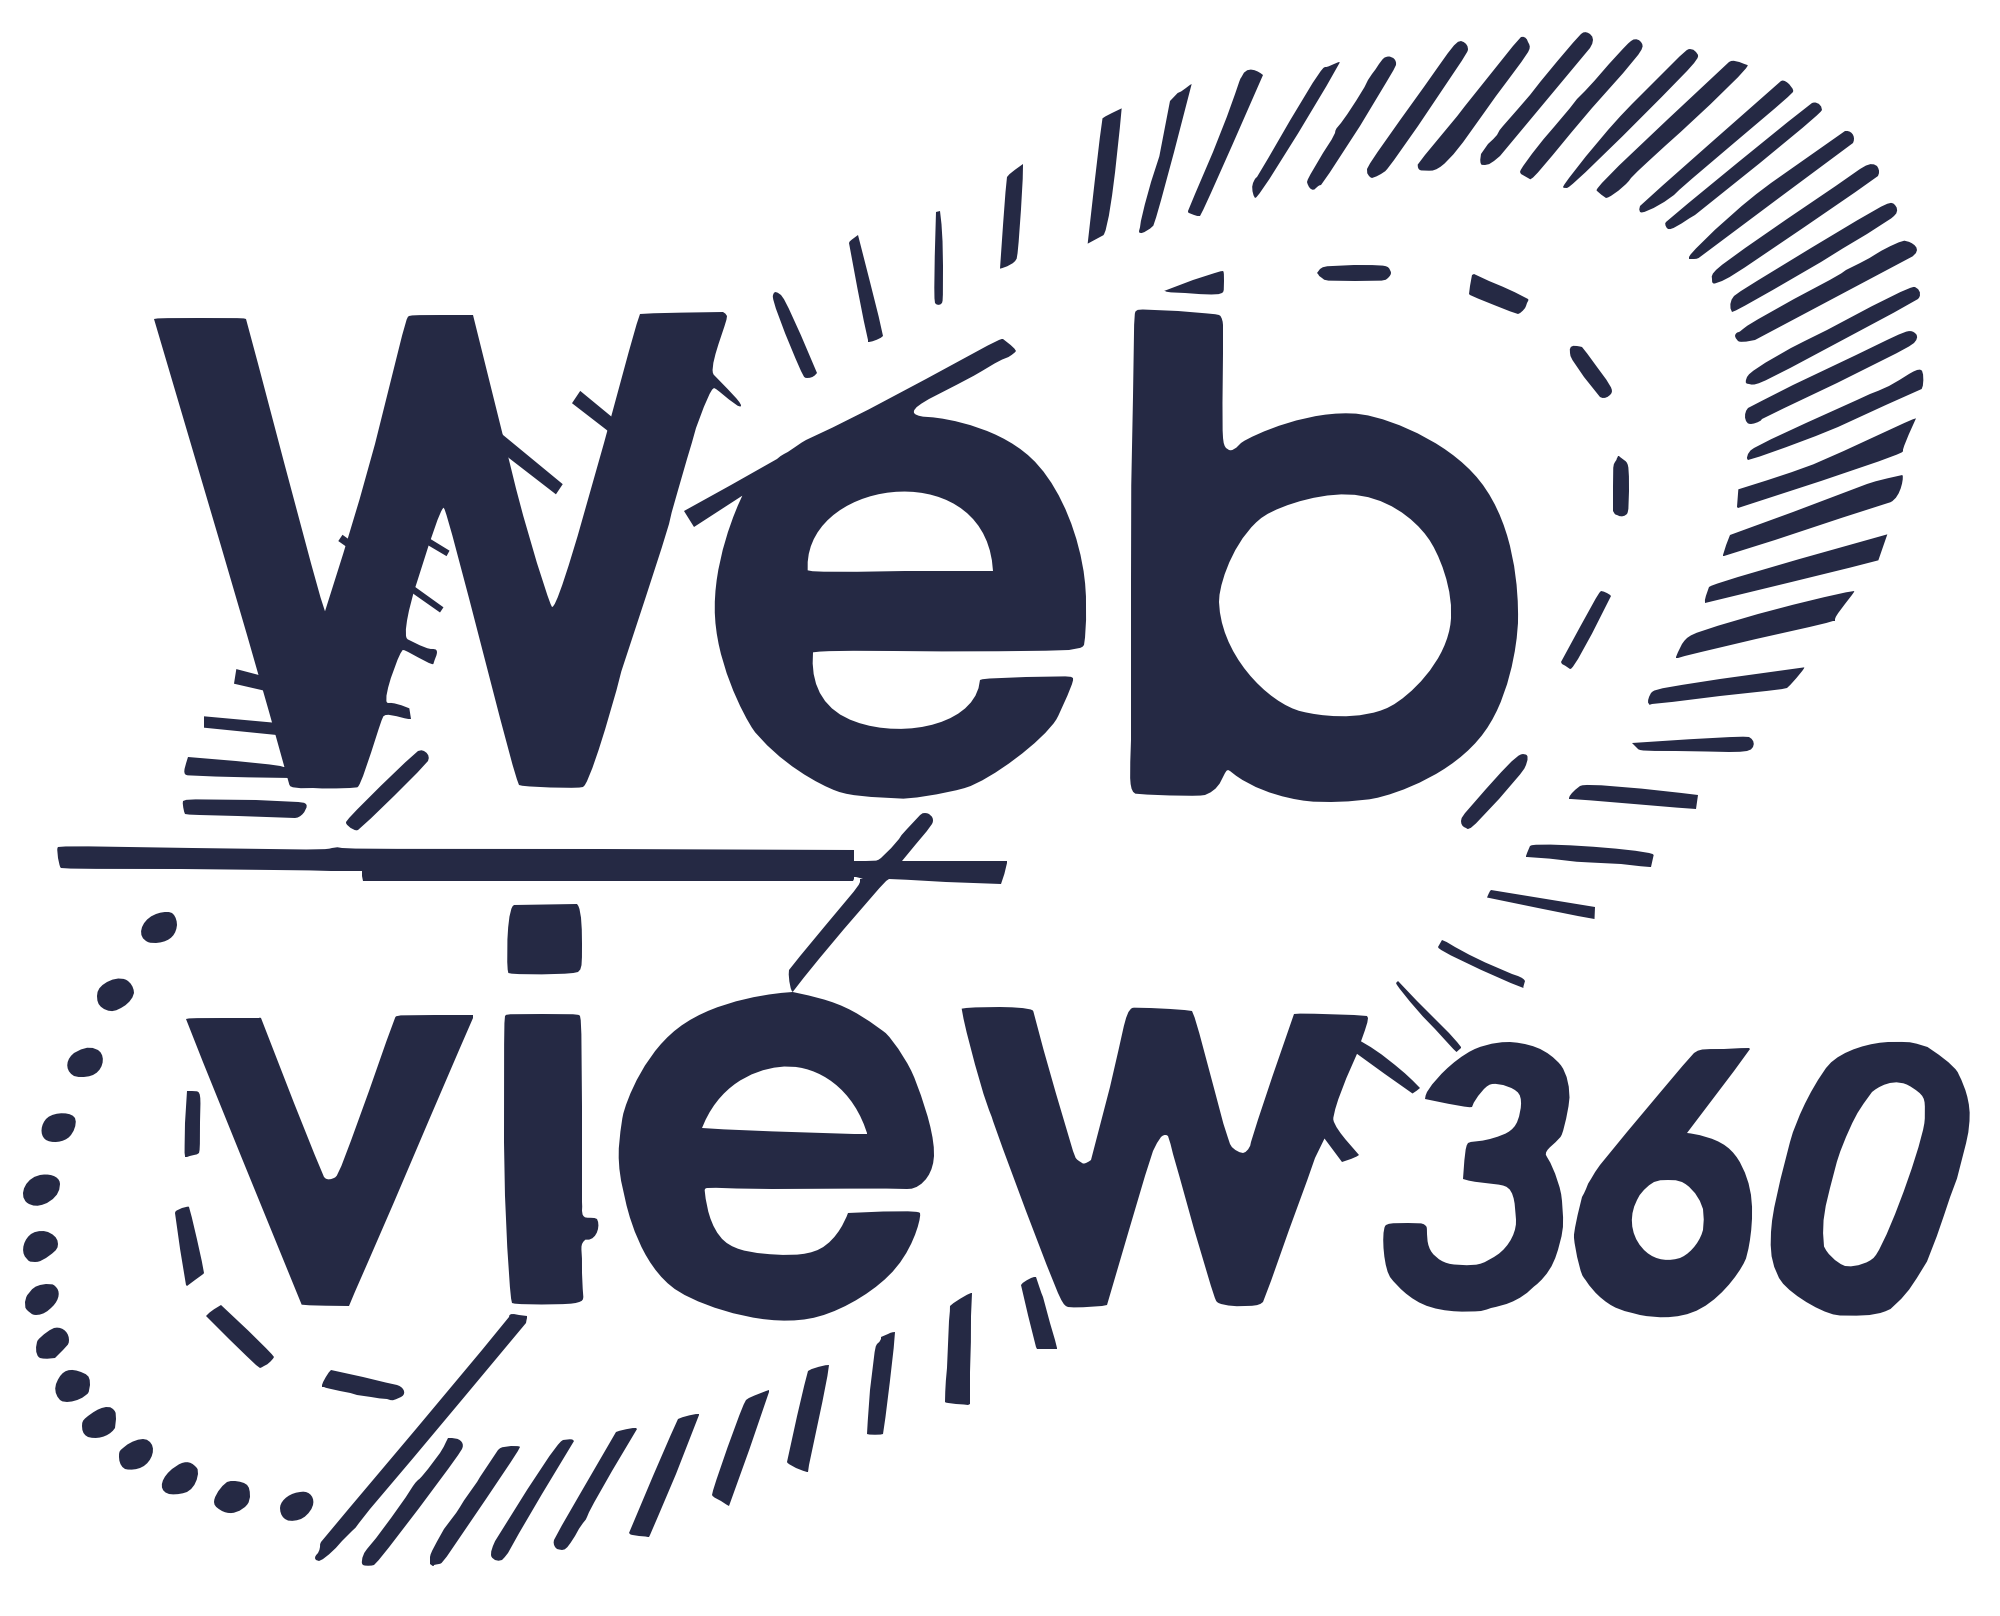 WebView360 – real estate photography and videography